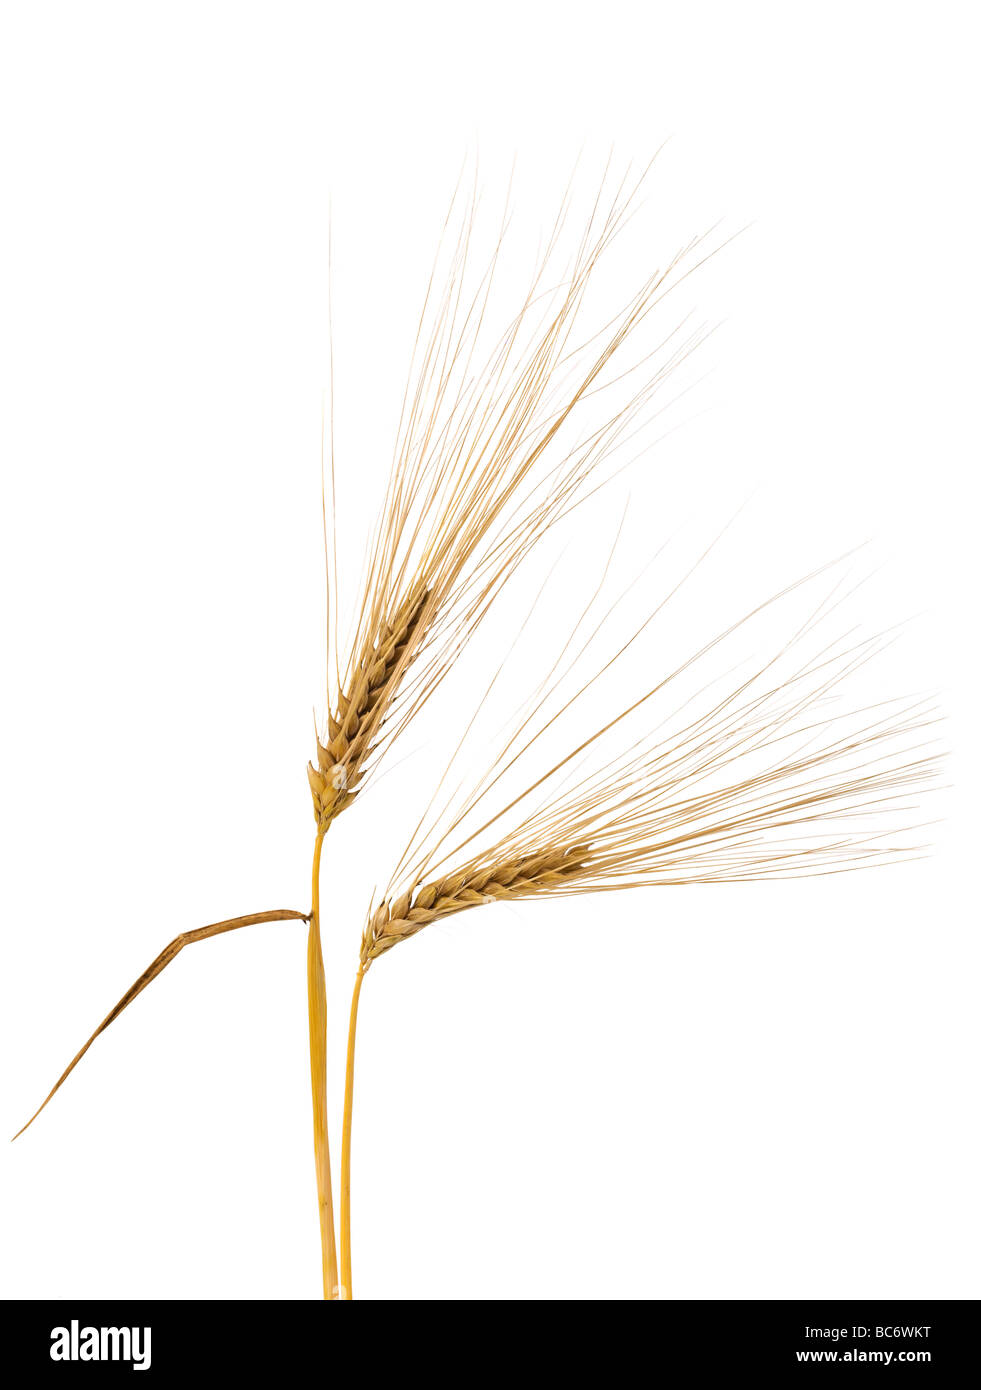 two ripe barley ears on white background Stock Photo